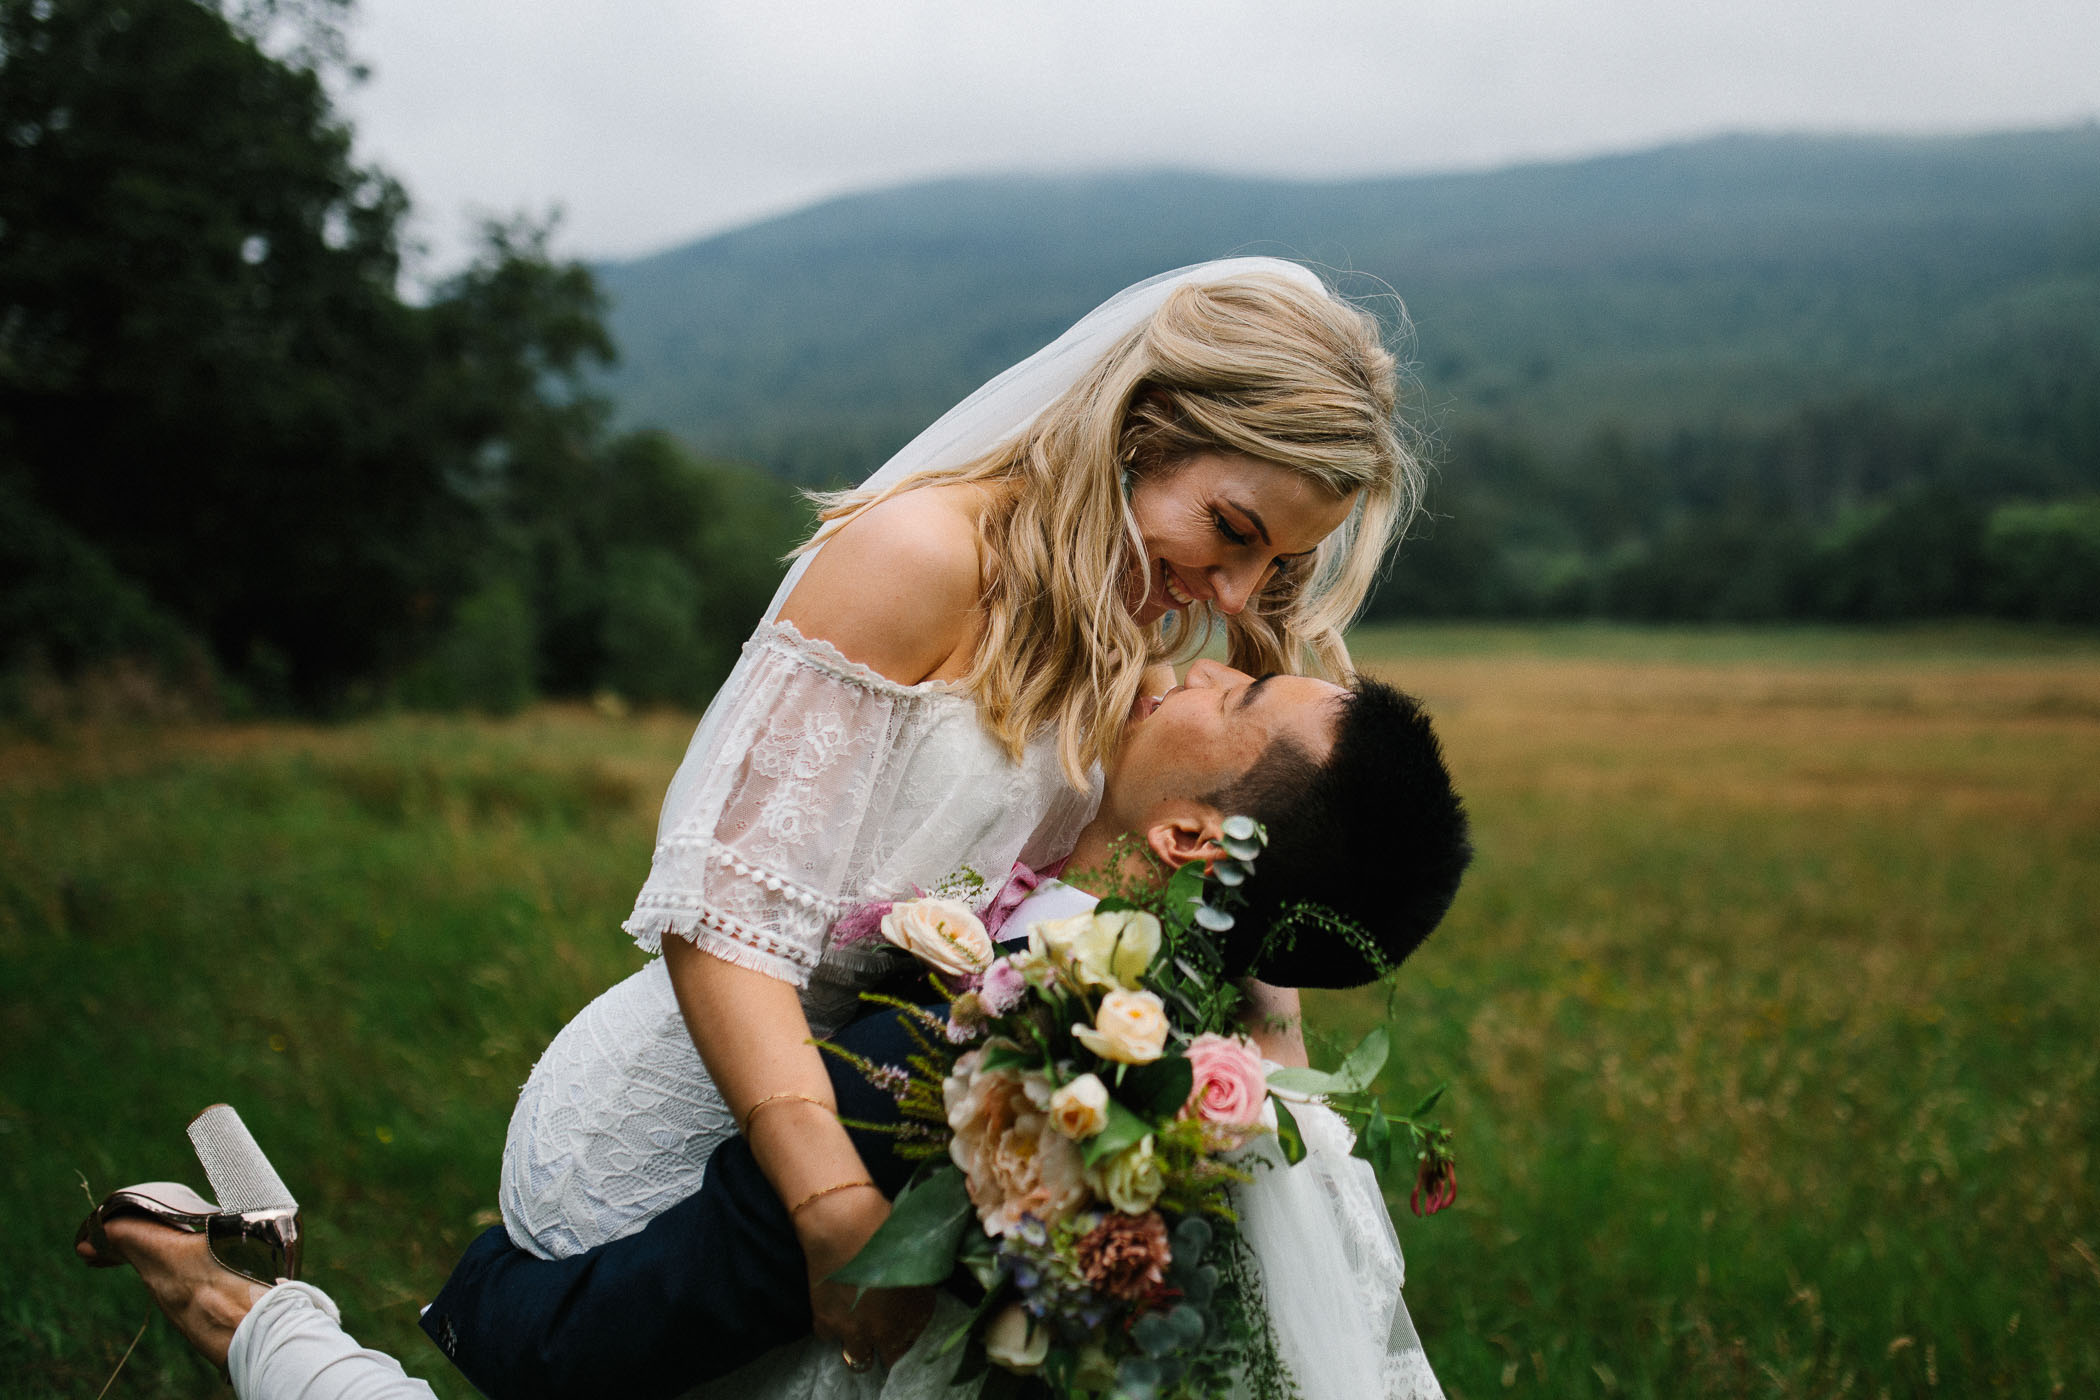 A bride is lifted up by her groom and they're about to kiss. She's holding a bouquet of ivory and pink flowers. By Luke Flint Photography